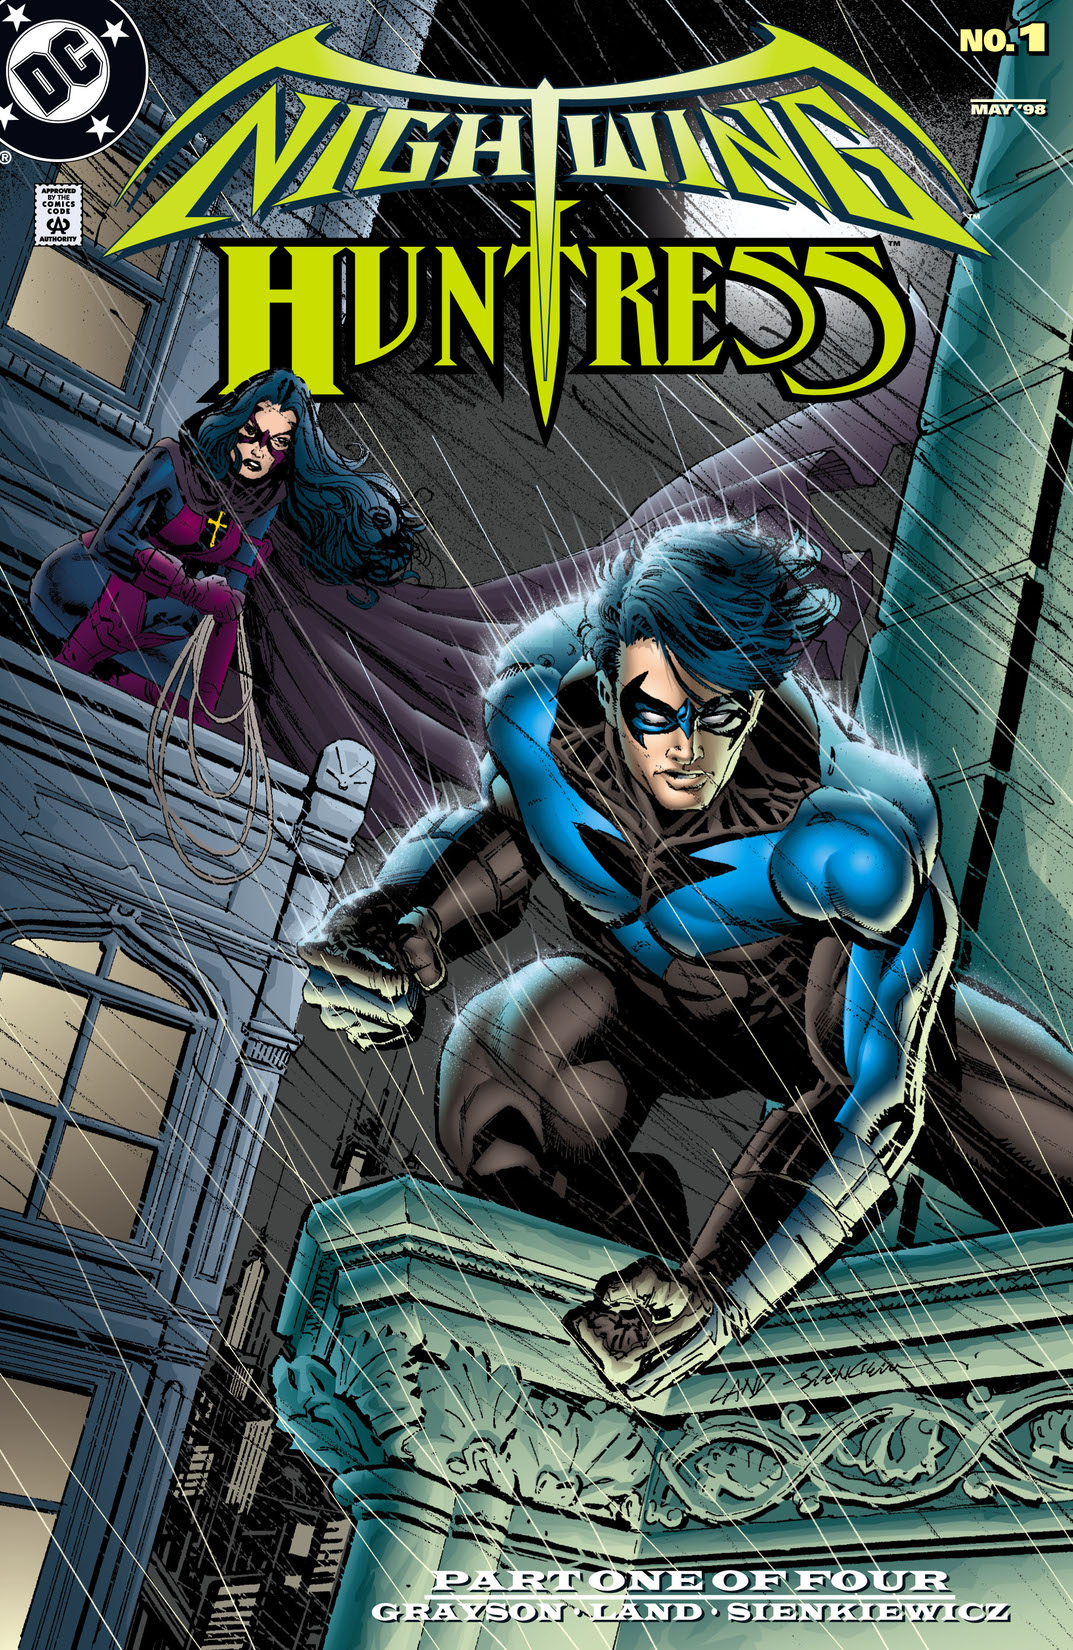 Nightwing and Huntress #1 preview images